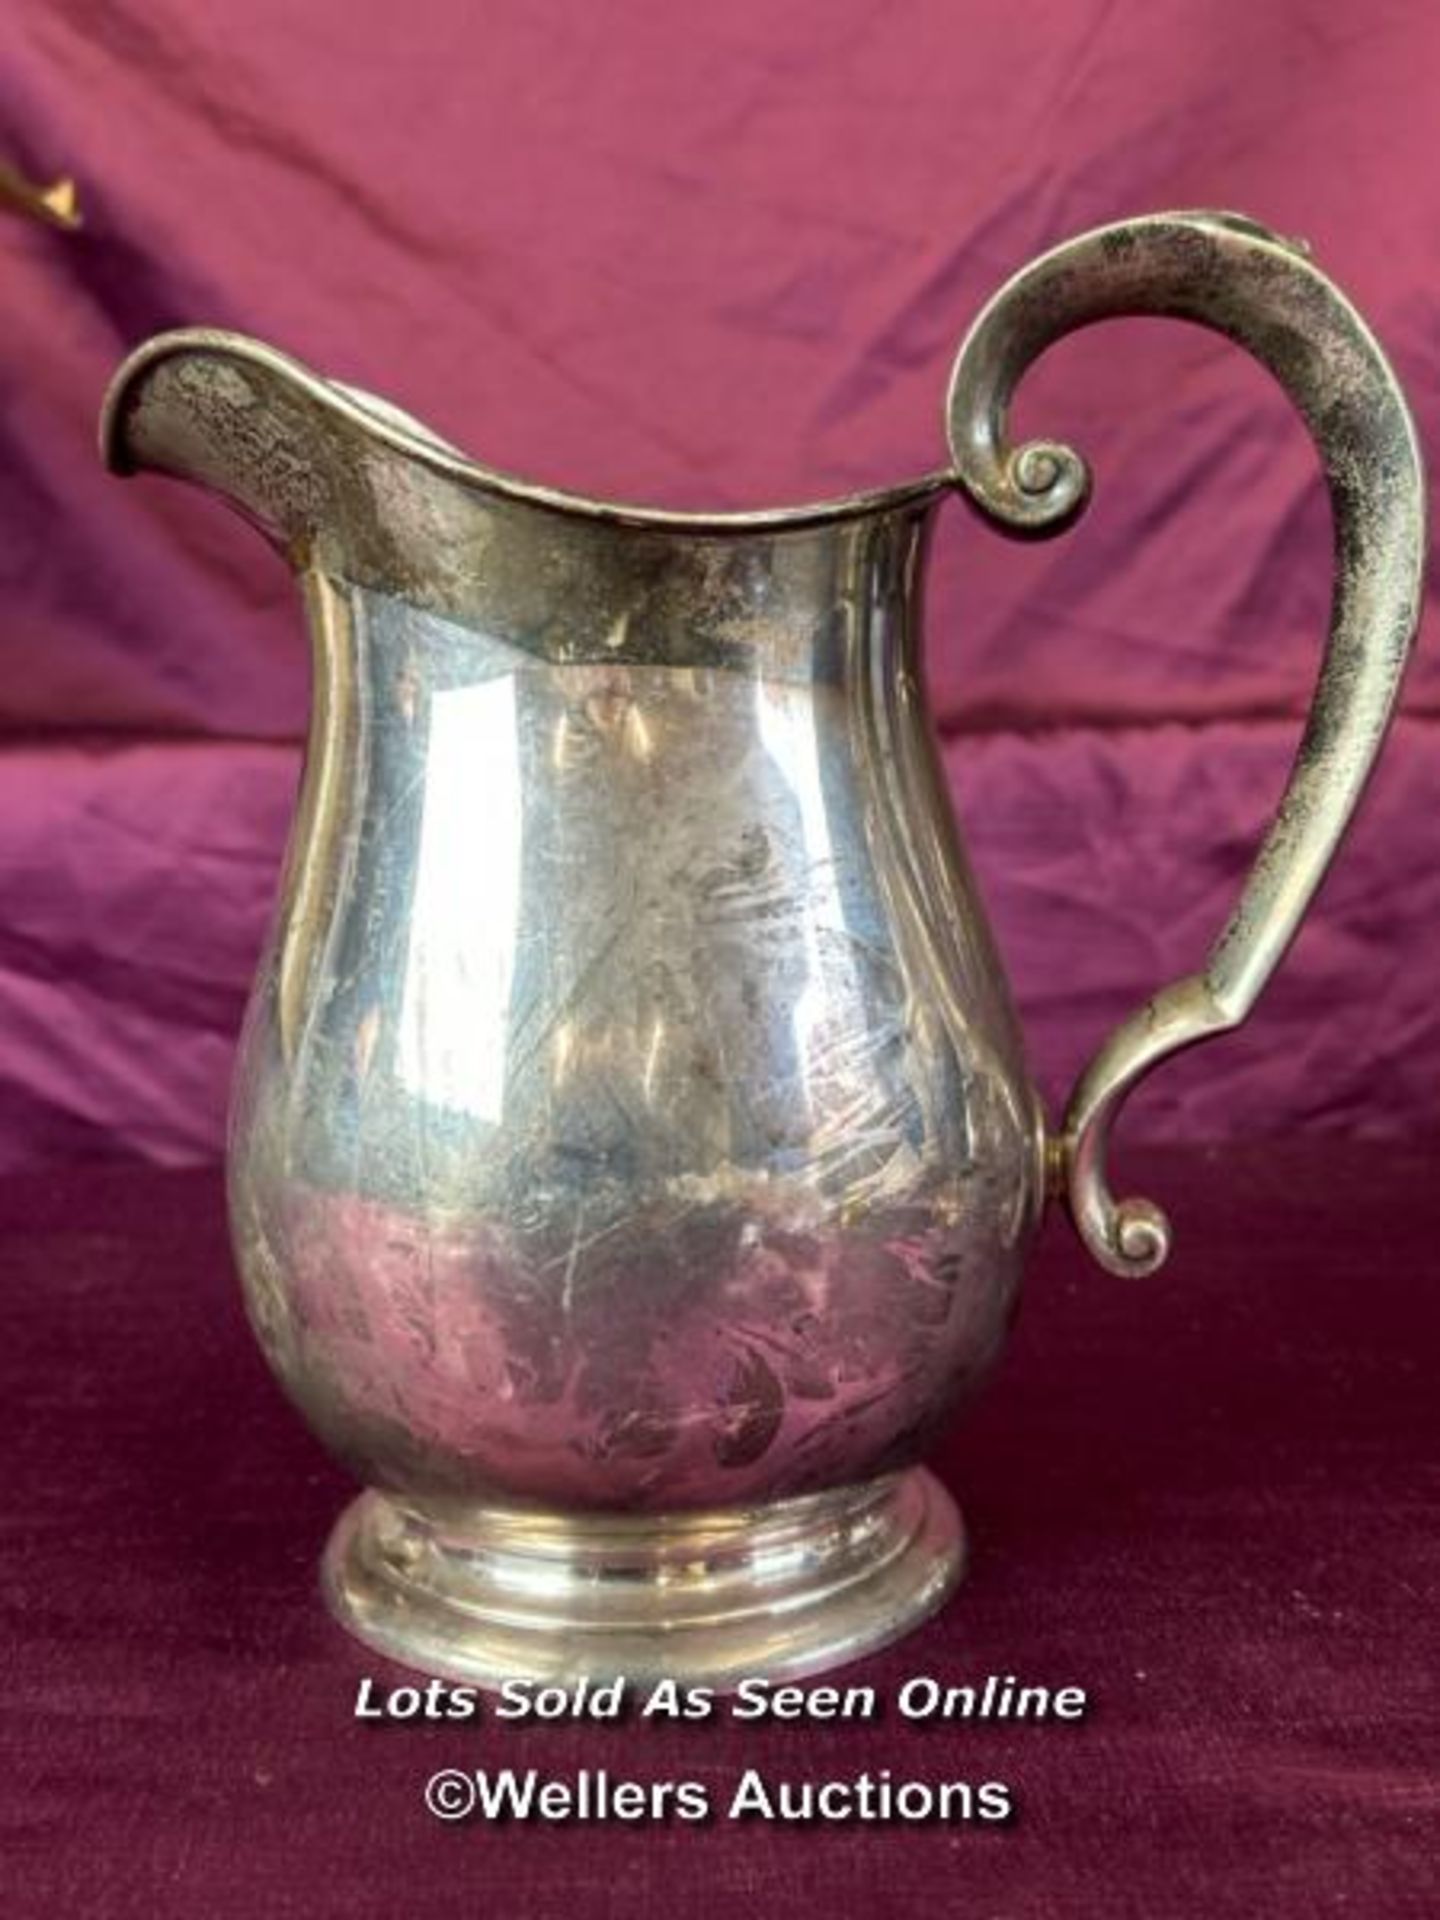 A PRESENTATION SILVER PLATED WATER JUG, ENGRAVED 'PATRICK T. SEXTON, 25TH ANNIVERSARY 1956, GREAT